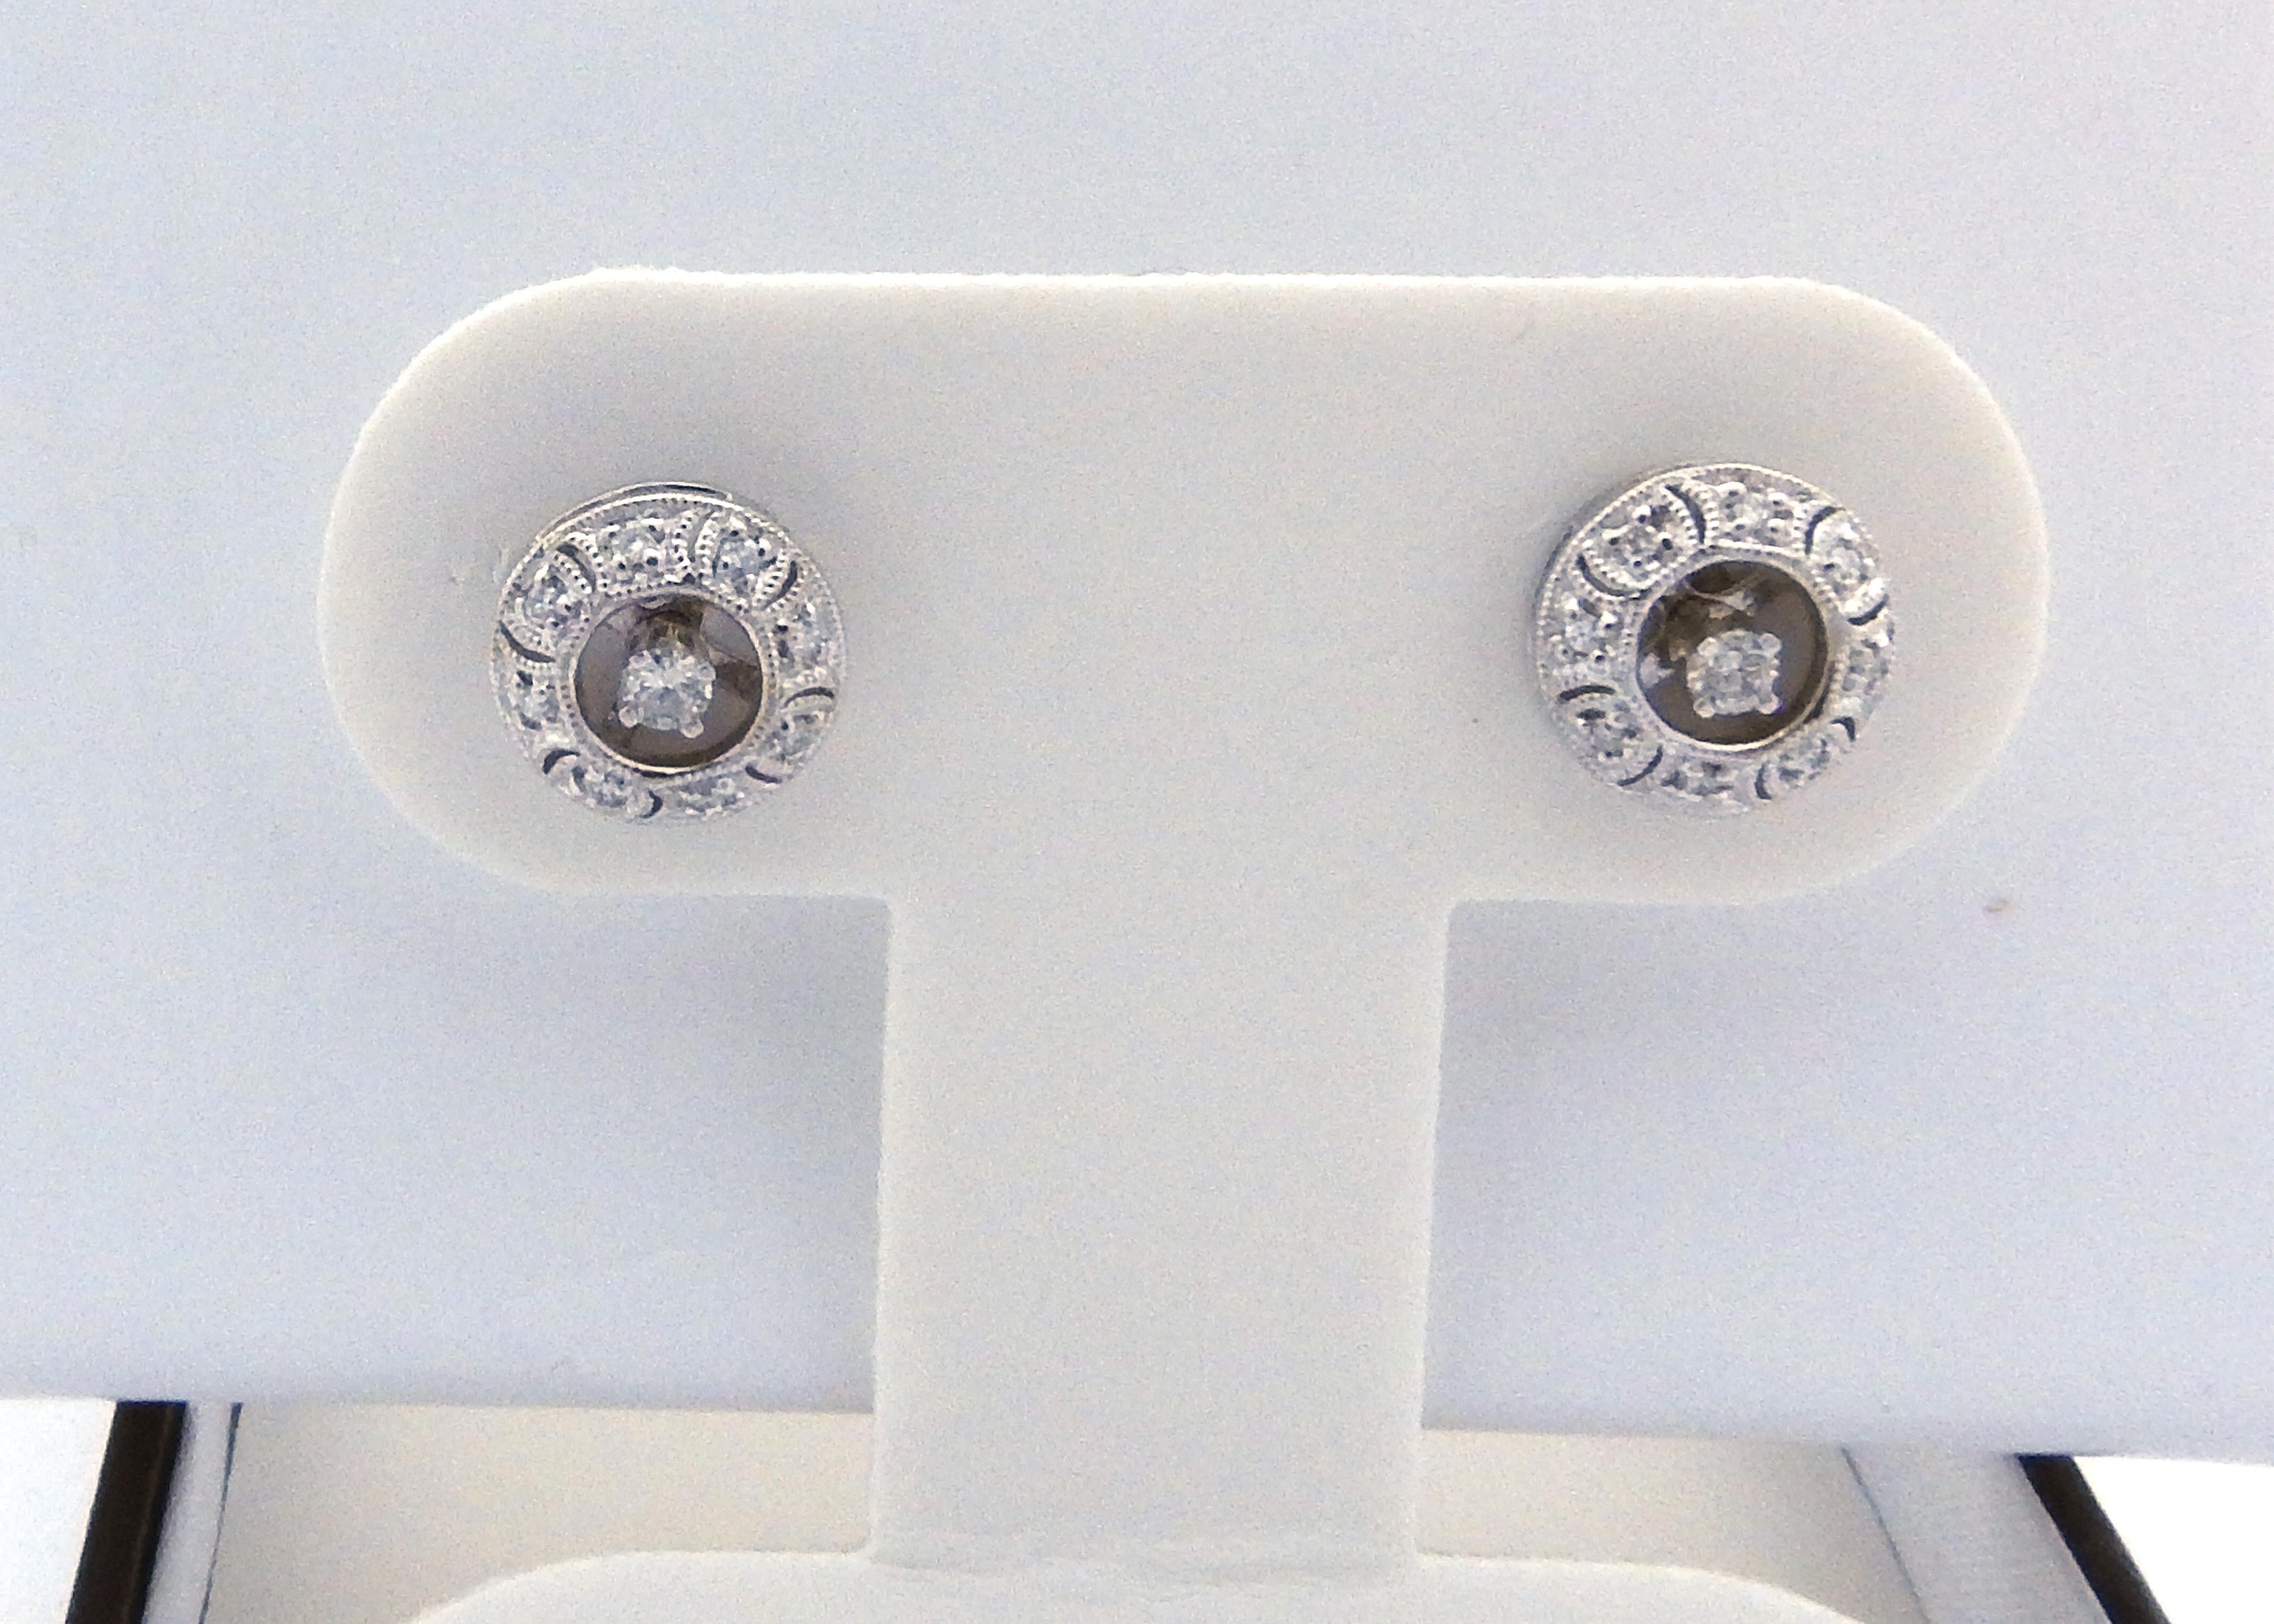 Vintage 14 Karat White Gold and Diamond Earring Jackets

These sparkling earring jackets each feature eight round brilliant cut diamonds set in beautifully detailed 14K white gold.

These jackets have an opening that will fit a think post...a screw